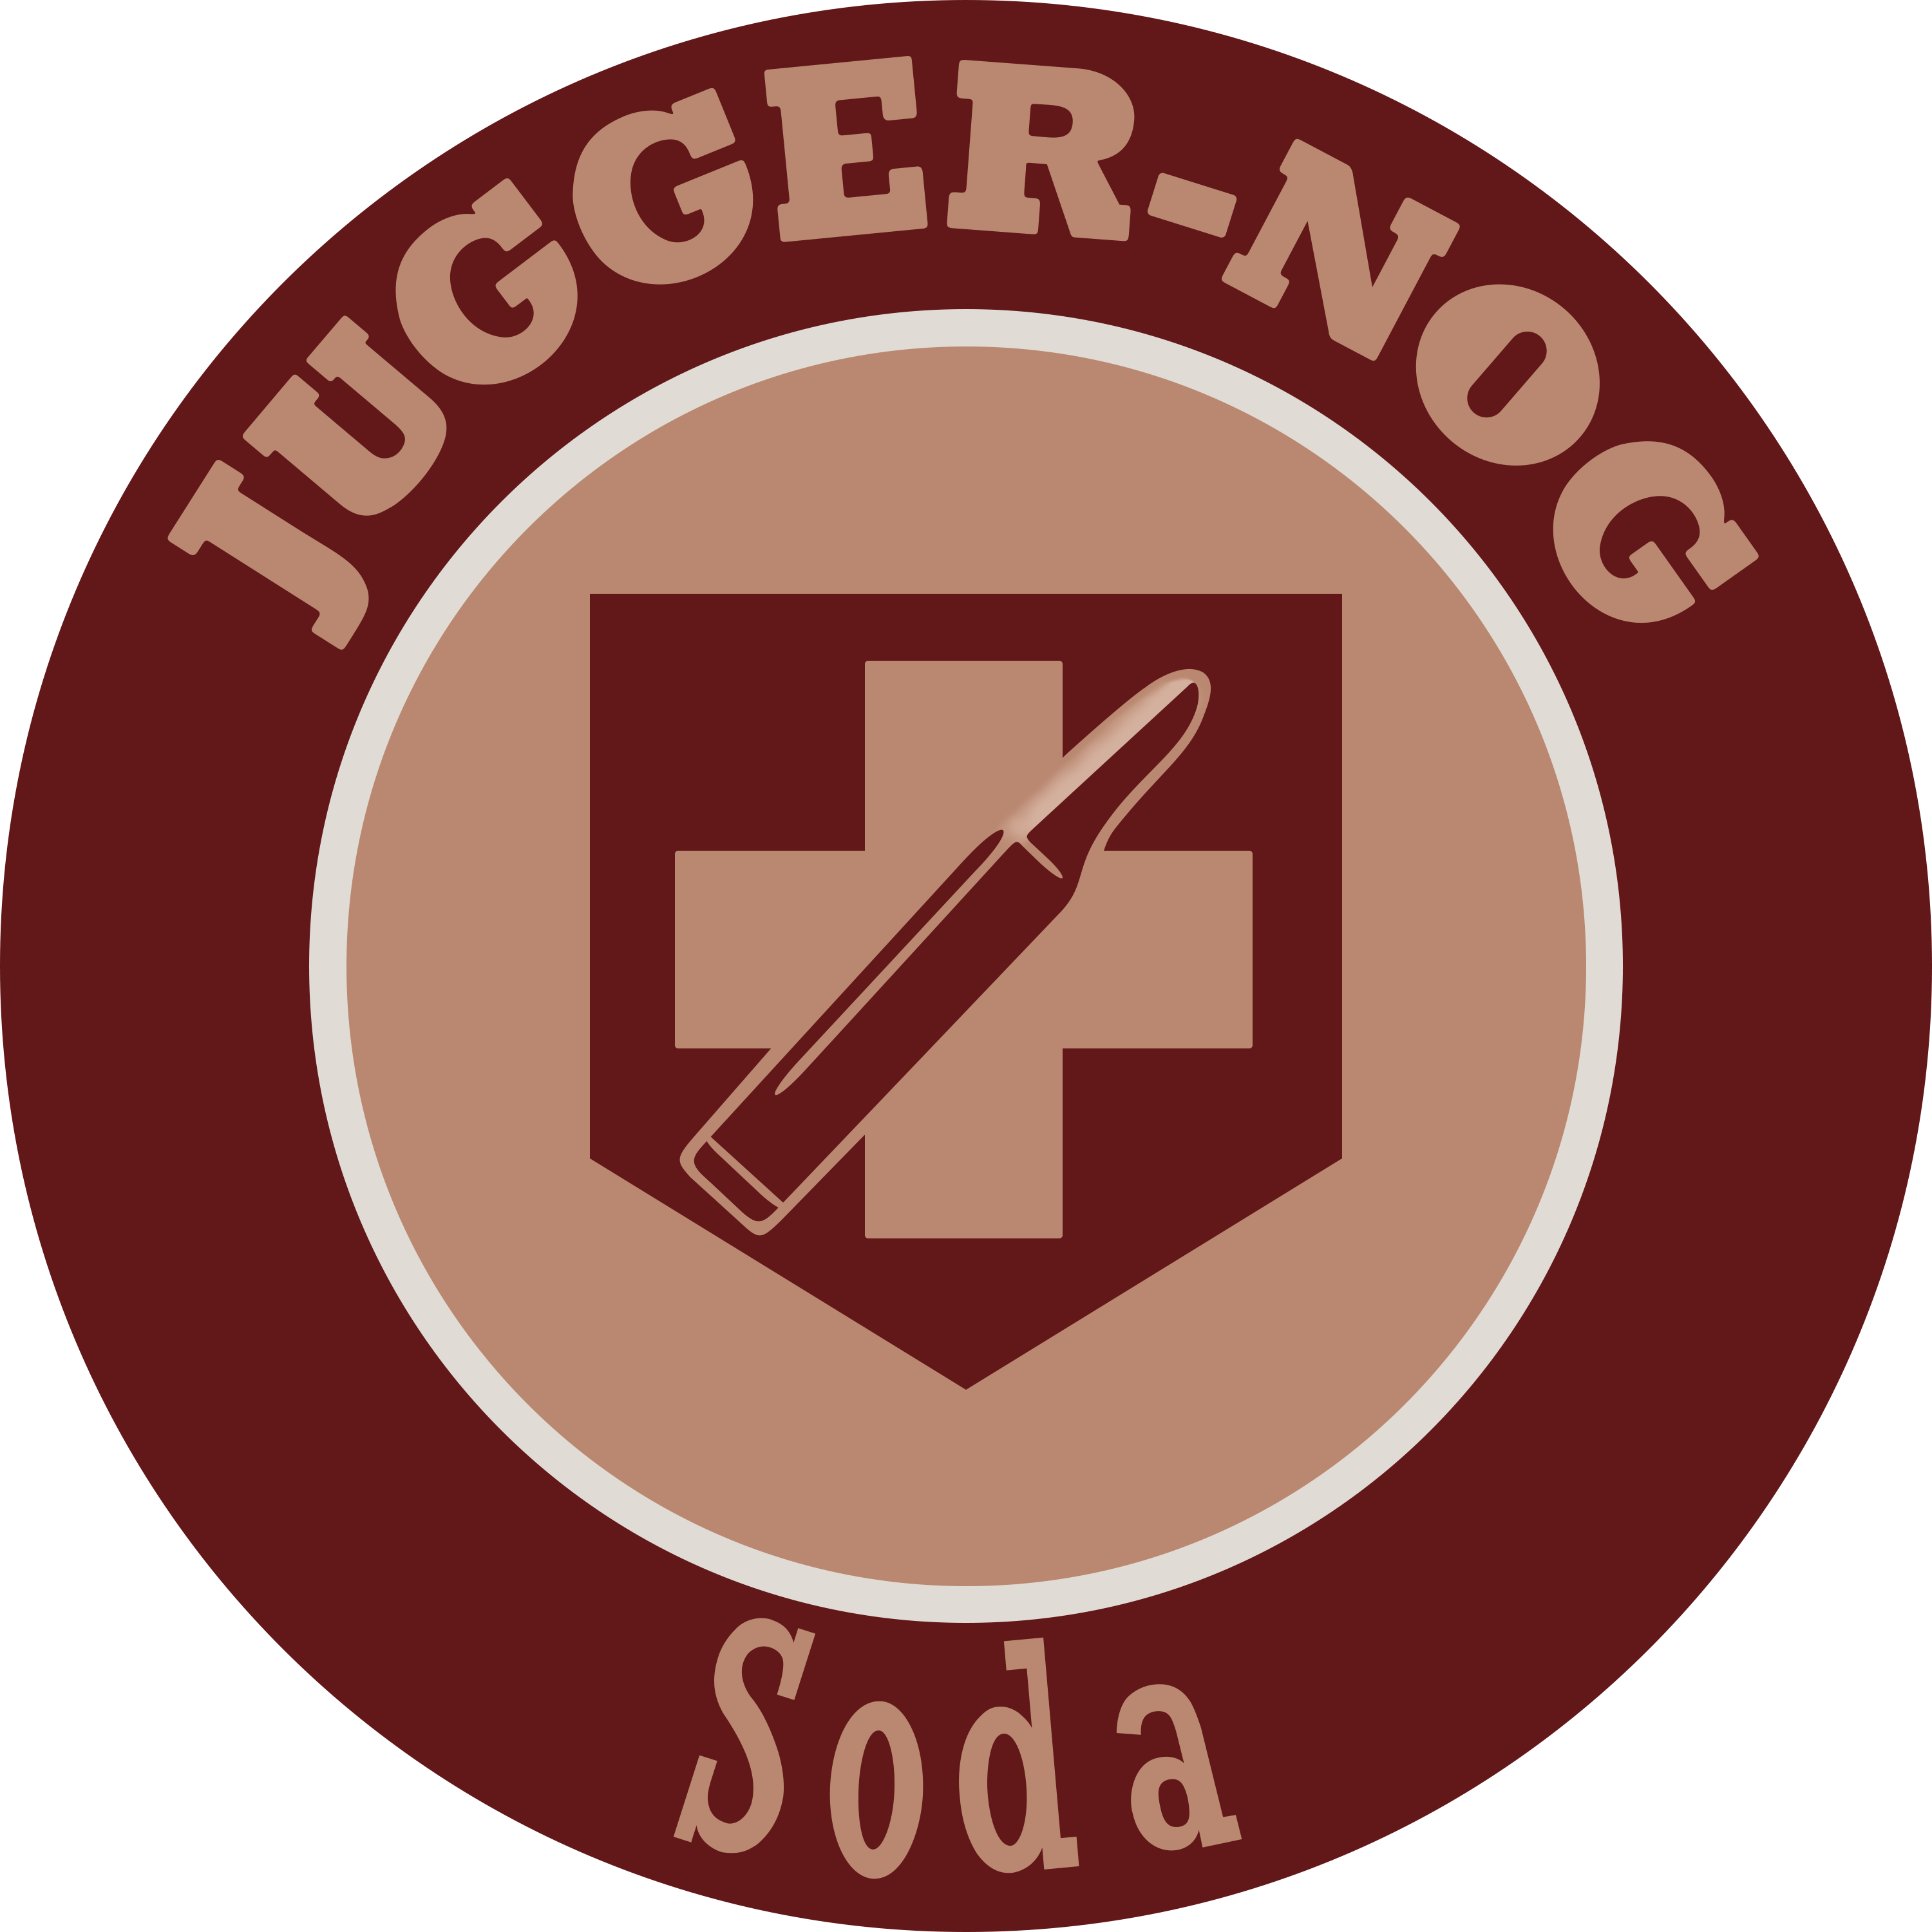 Download and share clipart about Juggernog Logo From Treyarch Zombies Would...